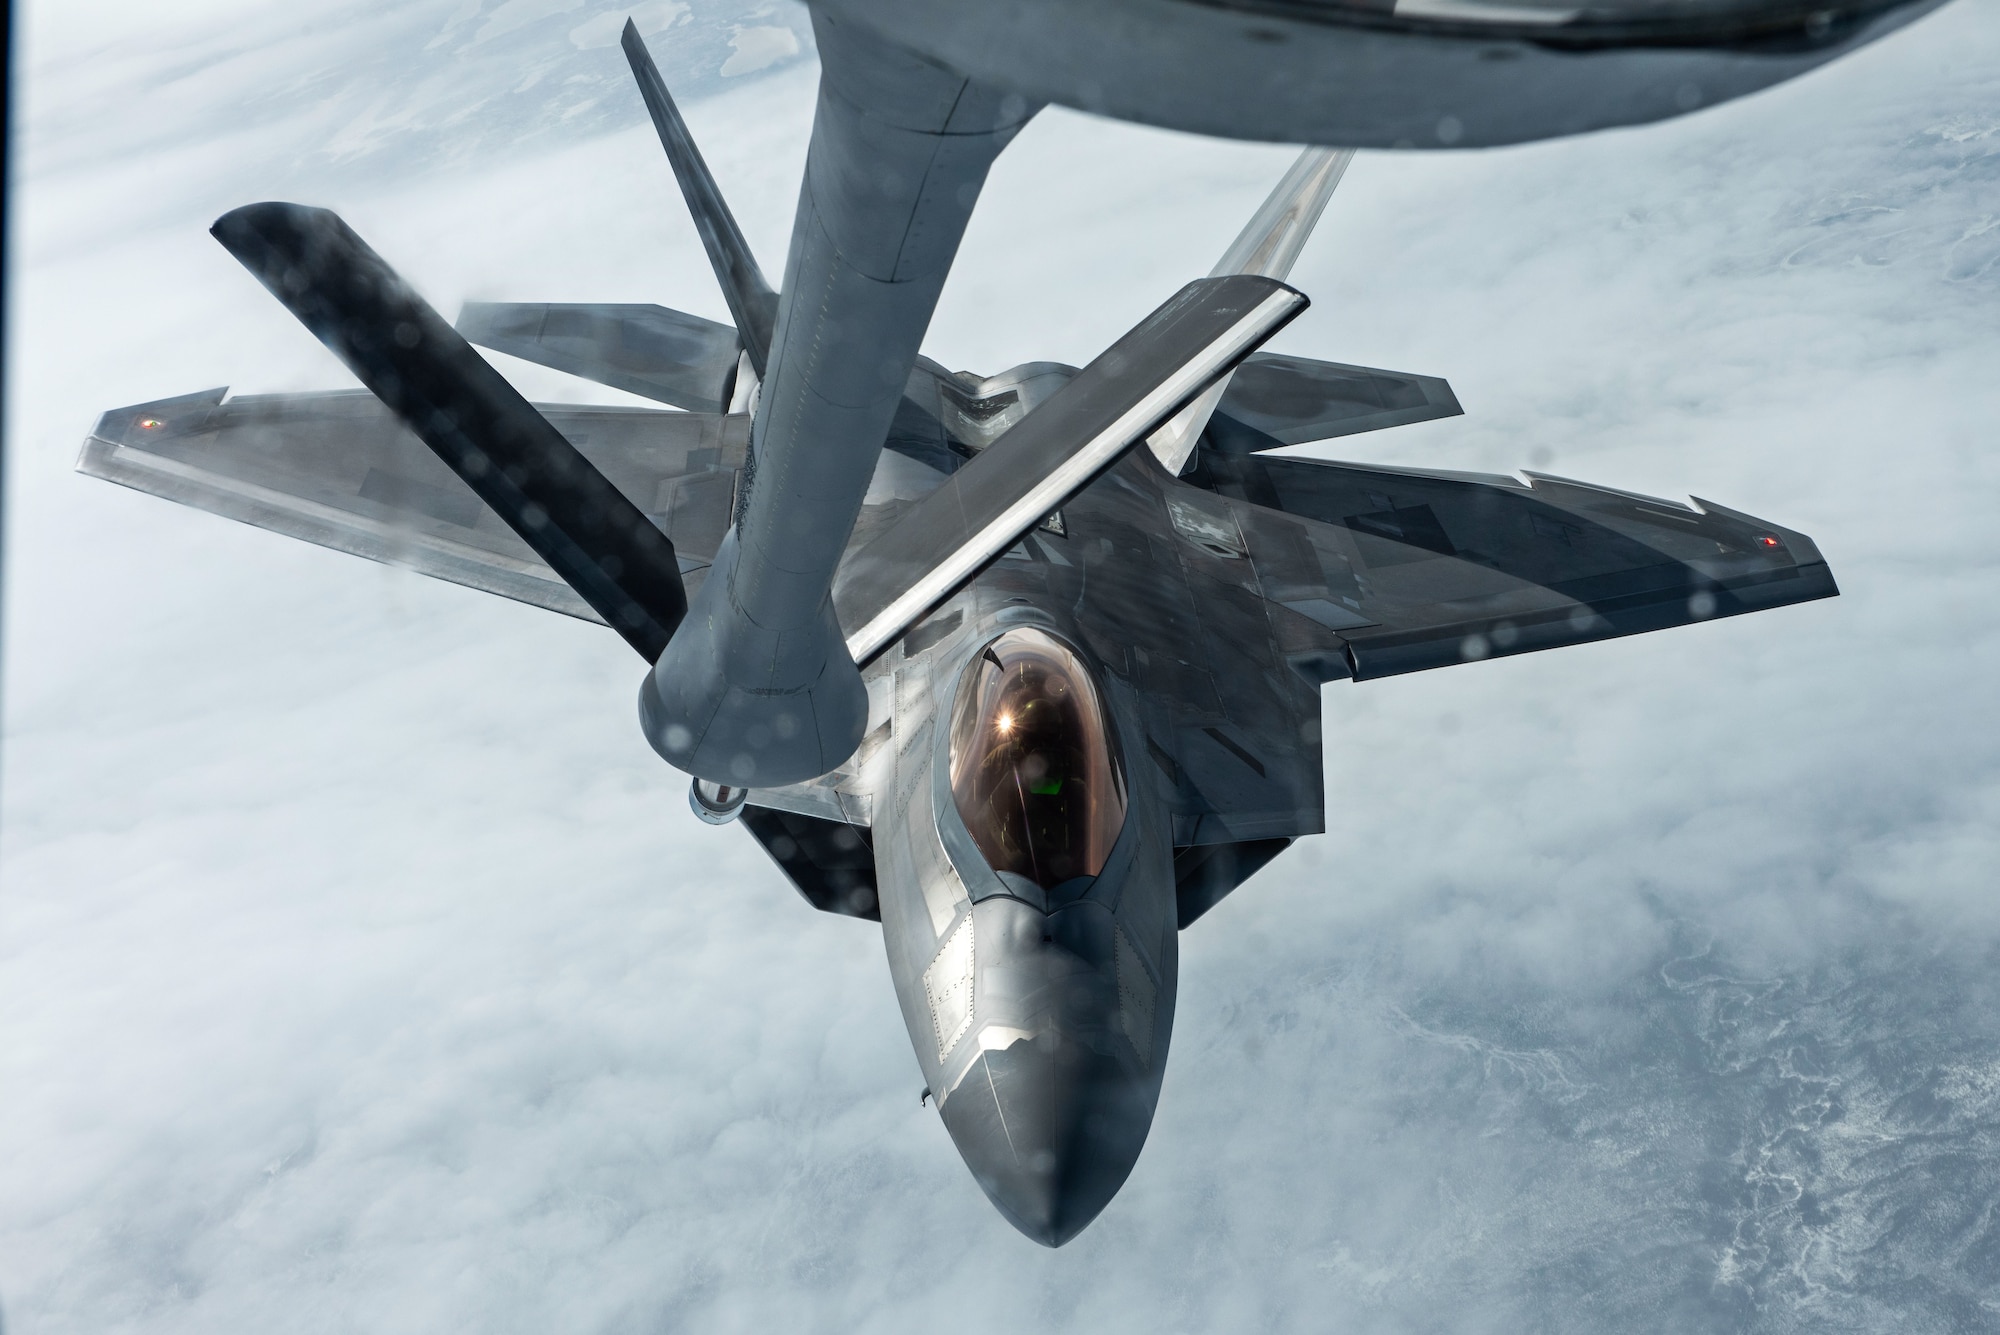 A U.S. Air Force KC-135 Stratotanker from Fairchild Air Force Base, Washington, refuels an F-22 Raptor from Joint Base Elmendorf-Richardson, Alaska, during Northern Edge 23-1, May 10, 2023. NE 23-1 provides the opportunity for U.S. military personnel to sharpen their skills; to practice tactics, techniques, and procedures; to improve command, control and communication relationships; and to develop cooperative plans and programs.(U.S. Air Force photo by 2nd Lt. Ariana Wilkinson)